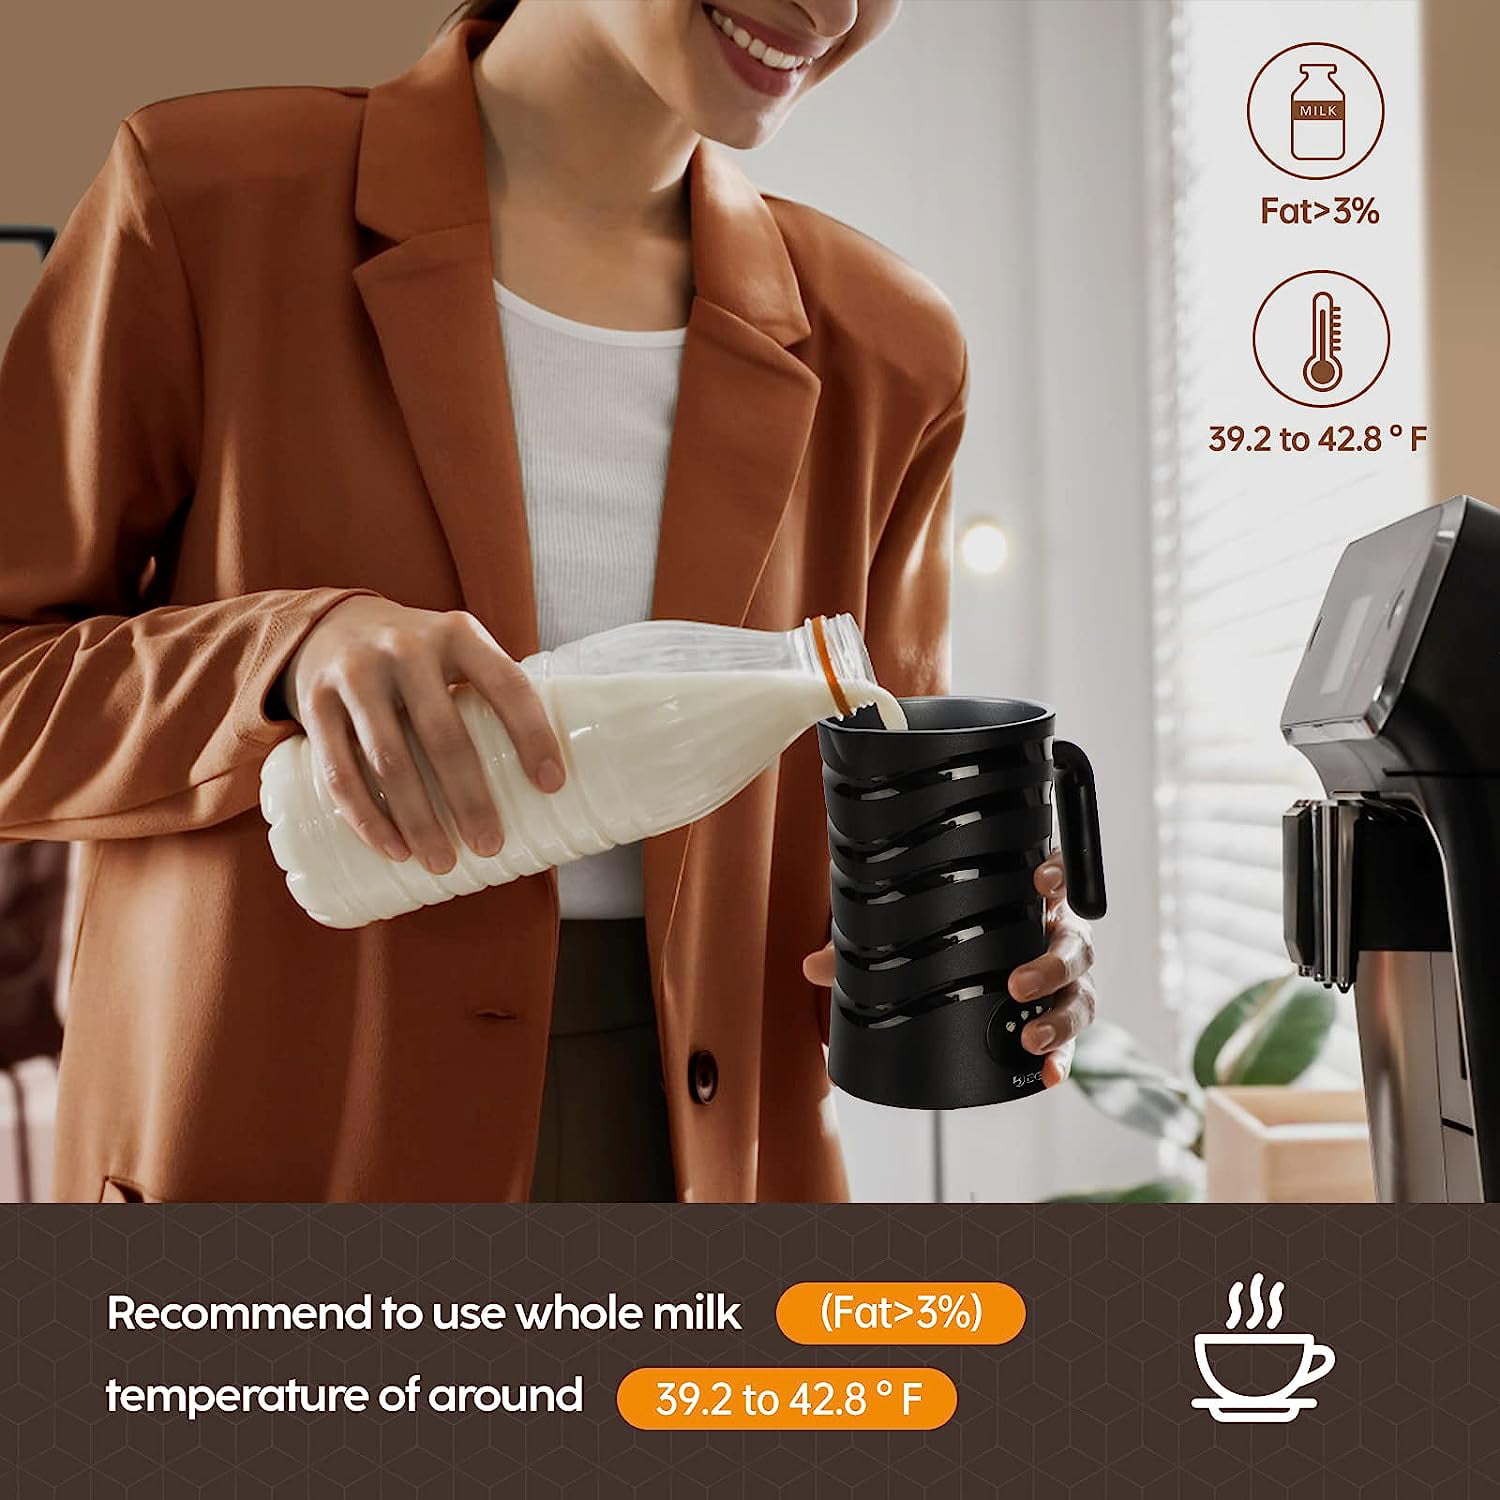 BEICHEN Milk Frother and Steamer, 4-in-1 Milk Foamer Frother for Coffee  Automatic Hot and Cold Foam Stainless Steel Maker with 2 Whisks for Latte  Cappuccinos, Macchiato, Hot Chocolate Milk